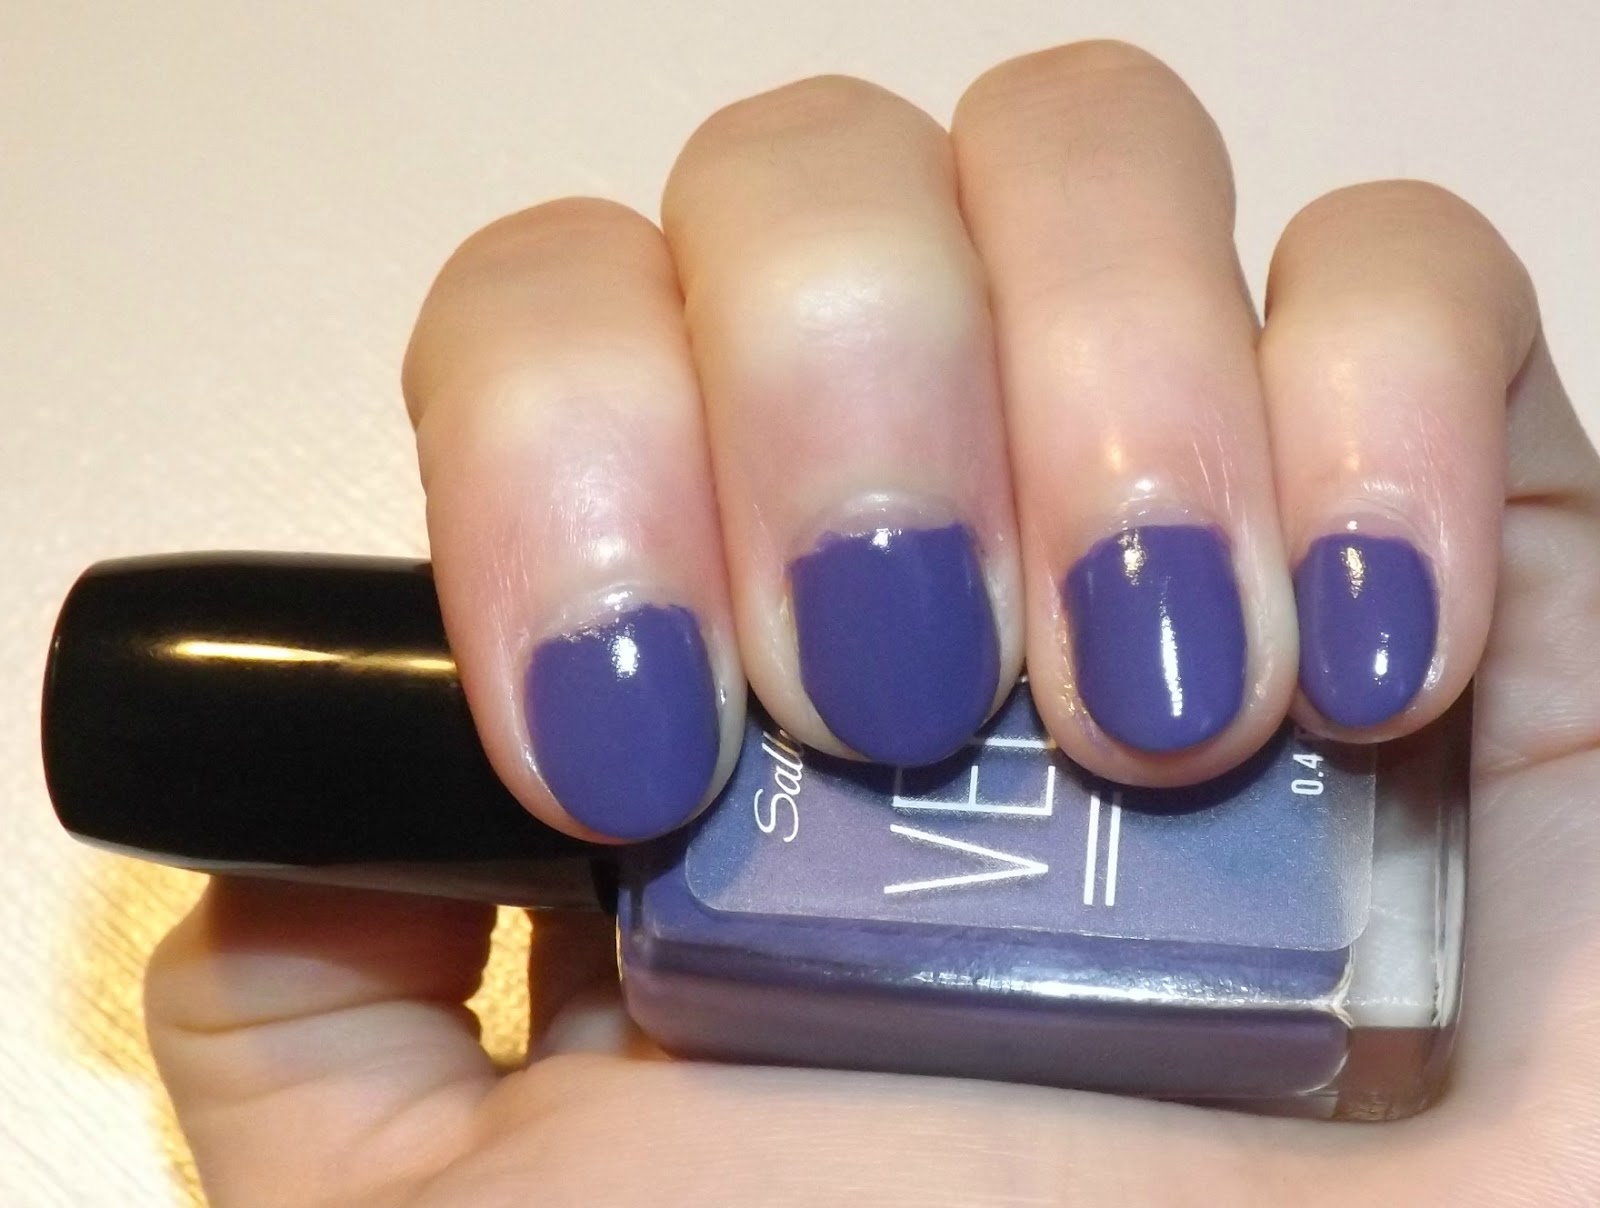 3. Sally Hansen To Be Perfectly Honest Nail Color - wide 5